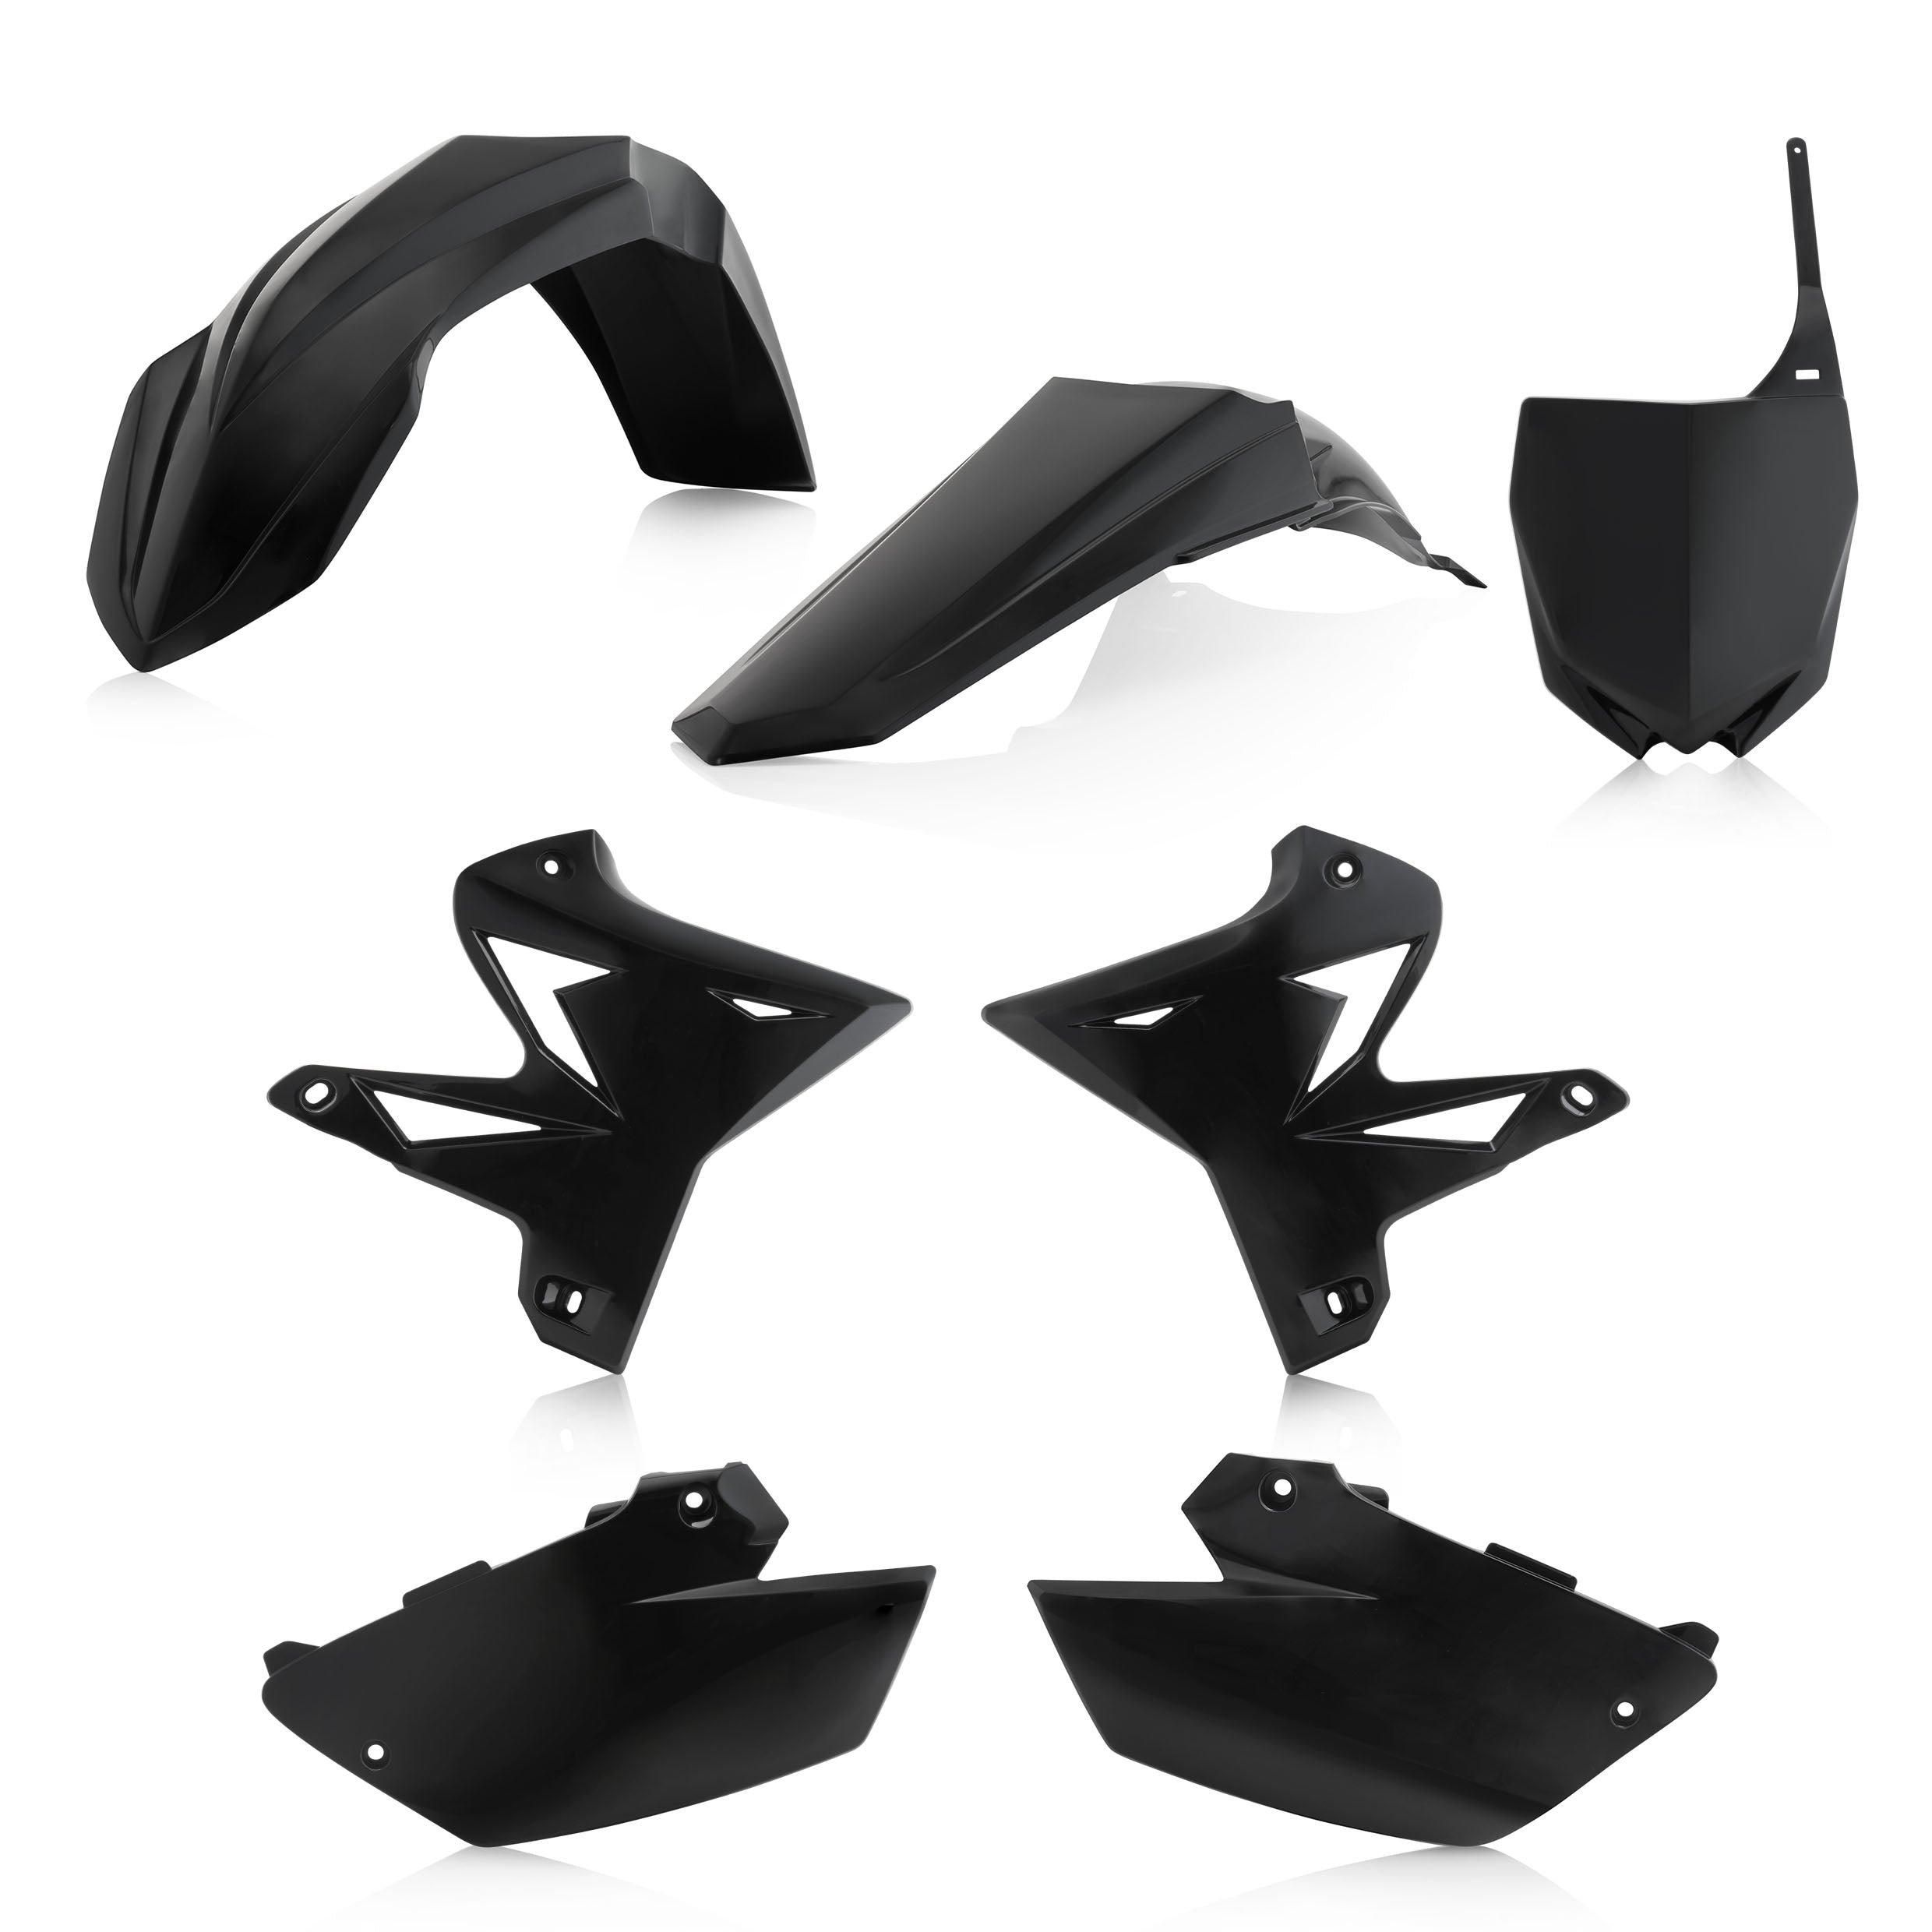 ACERBIS 0023488.090 KIT RESTYLING NERO COMPATIBLE CON YAMAHA YZ 250 02/14